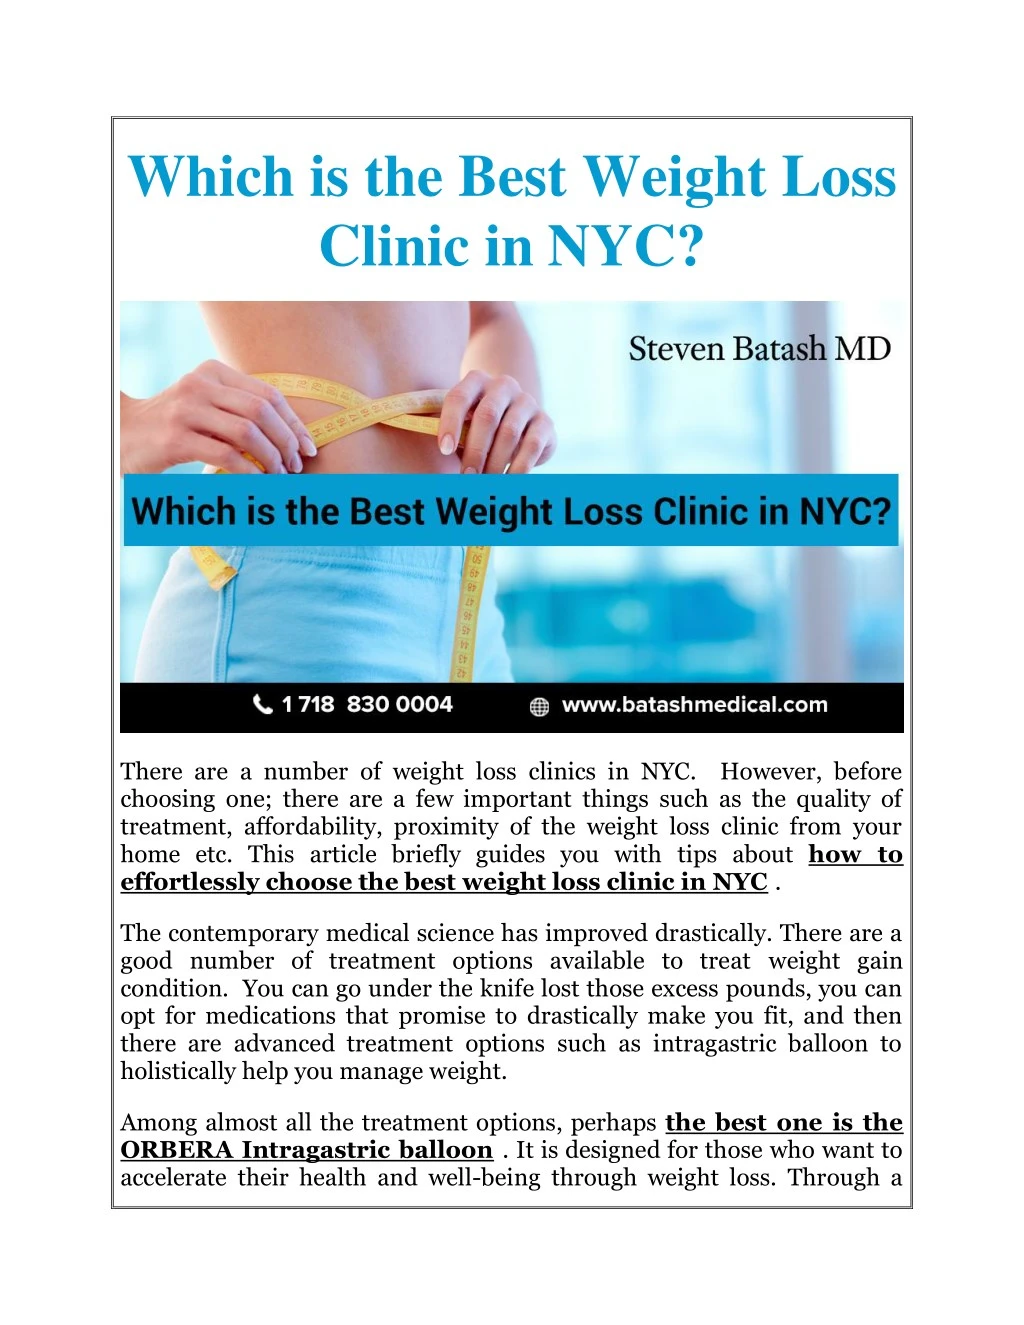 which is the best weight loss clinic in nyc